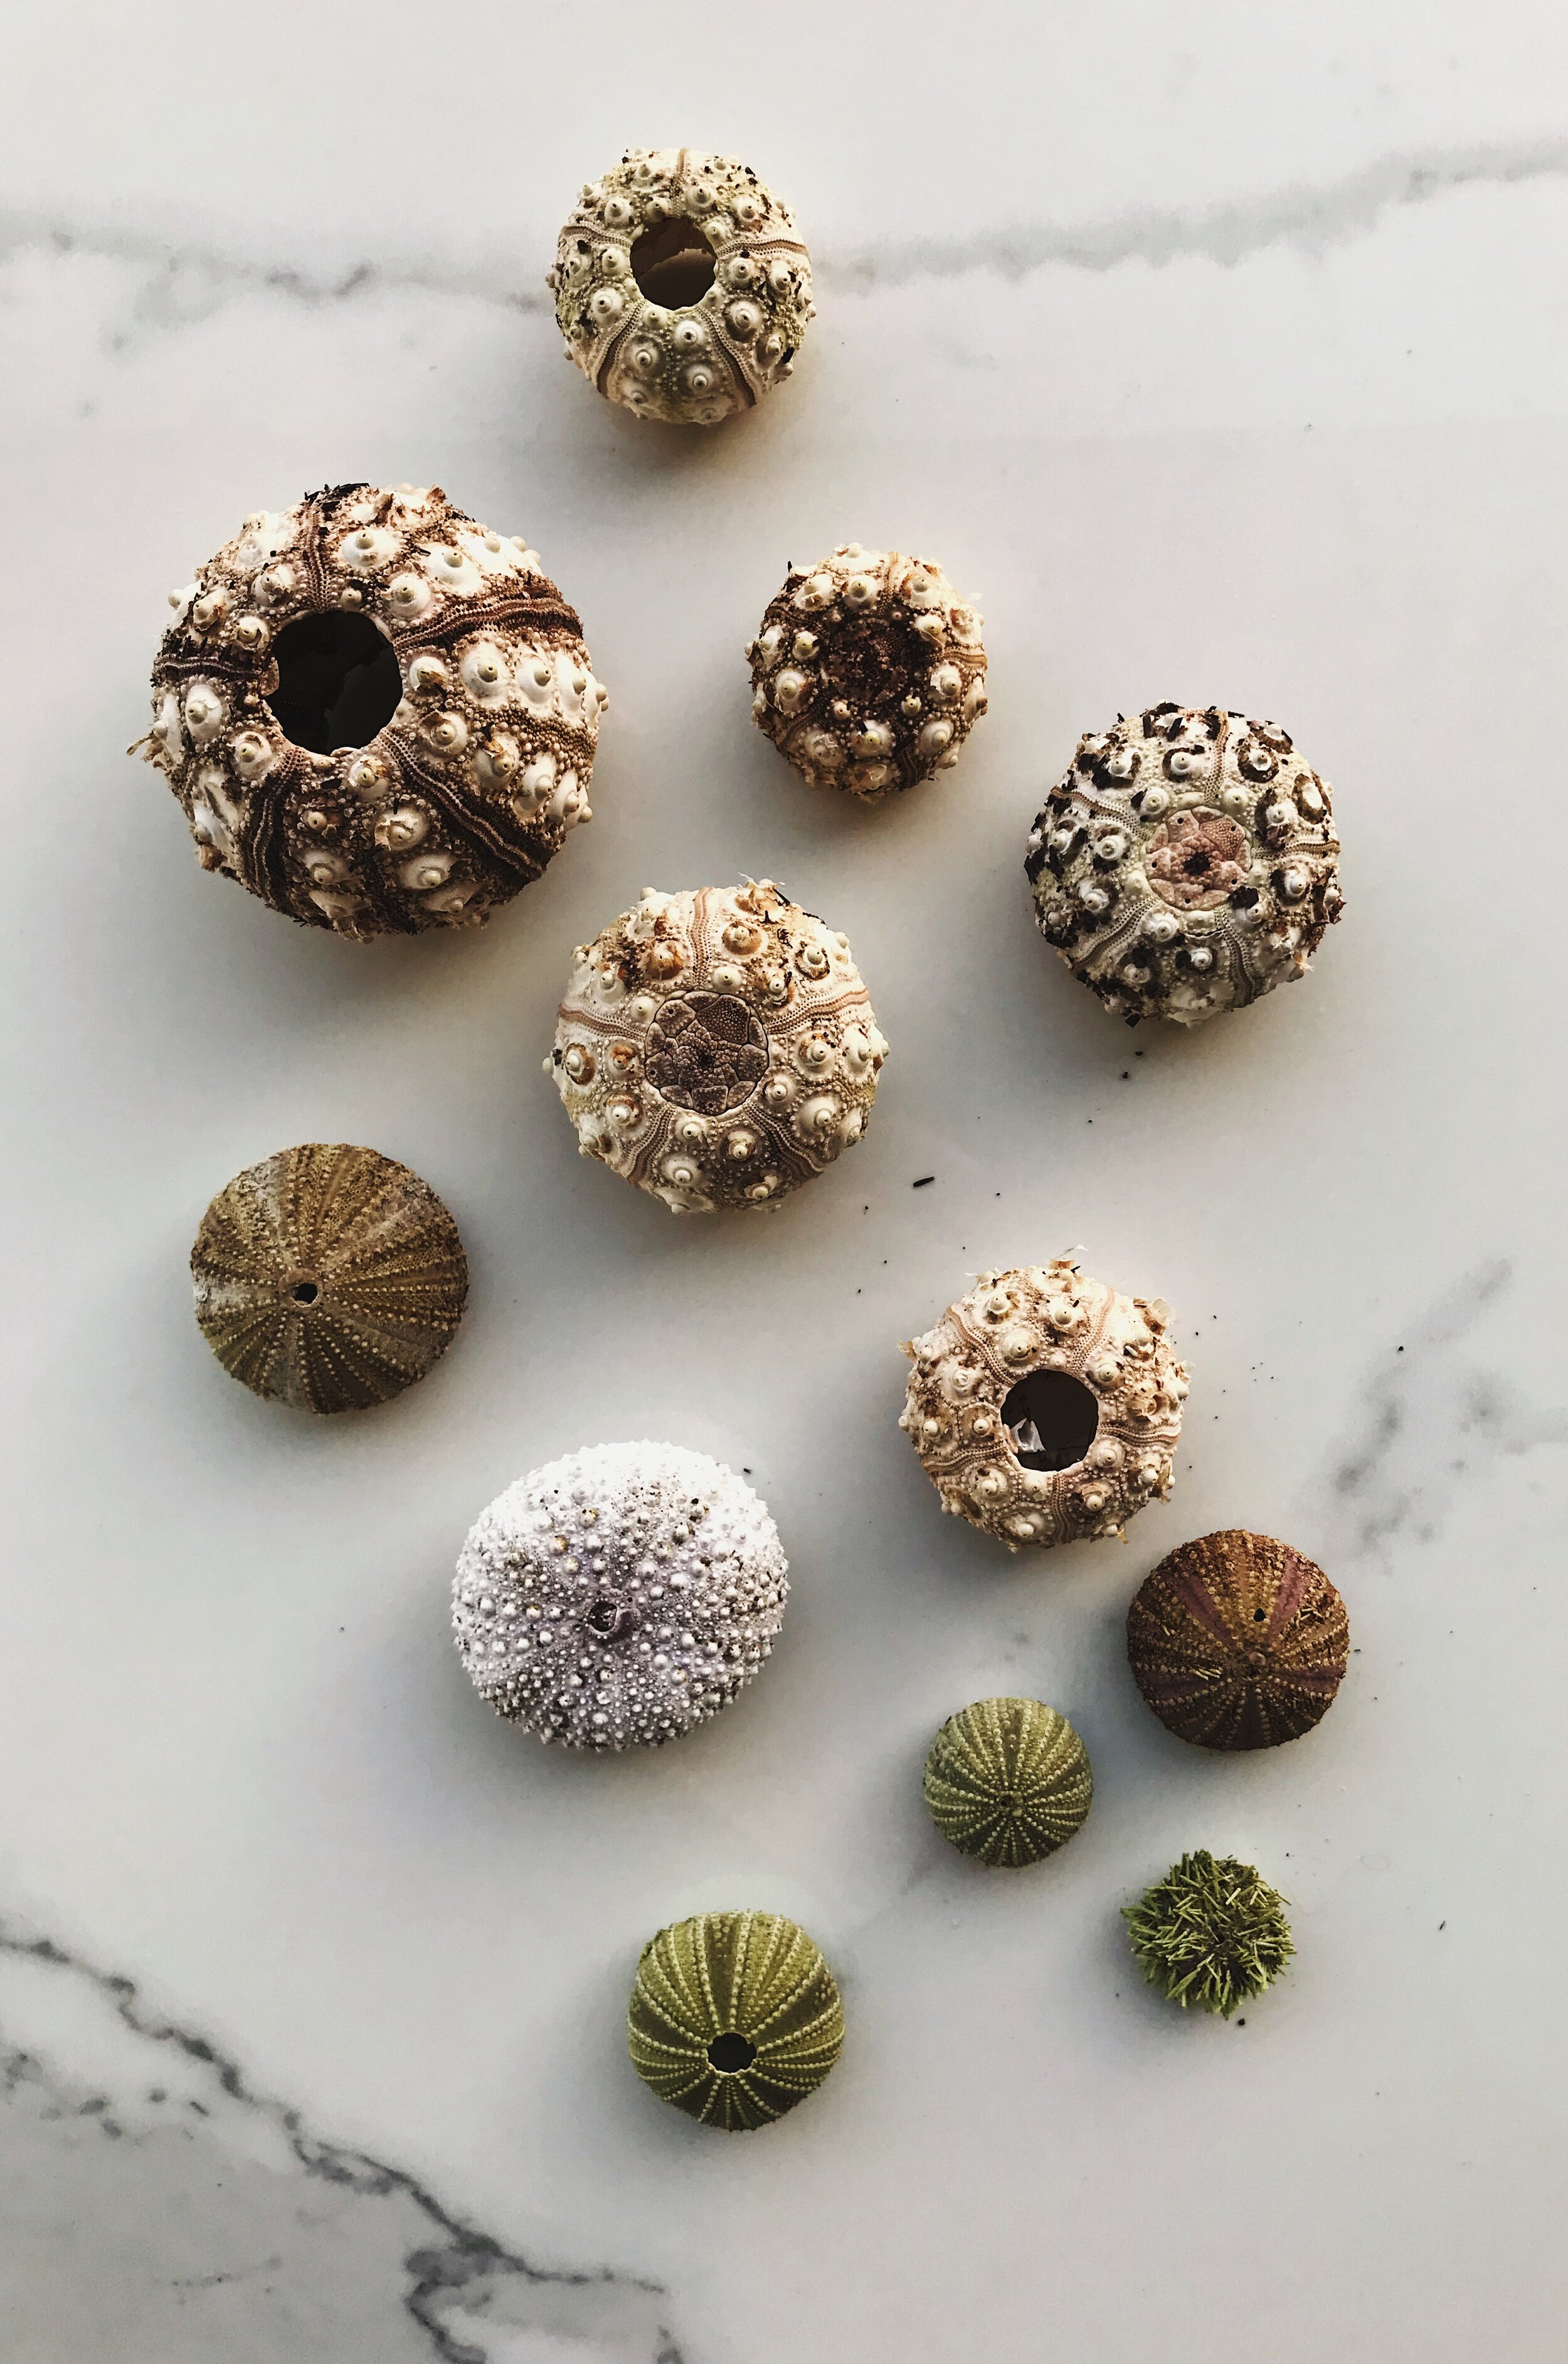  sea urchin tests - pencil-spined, green and others 